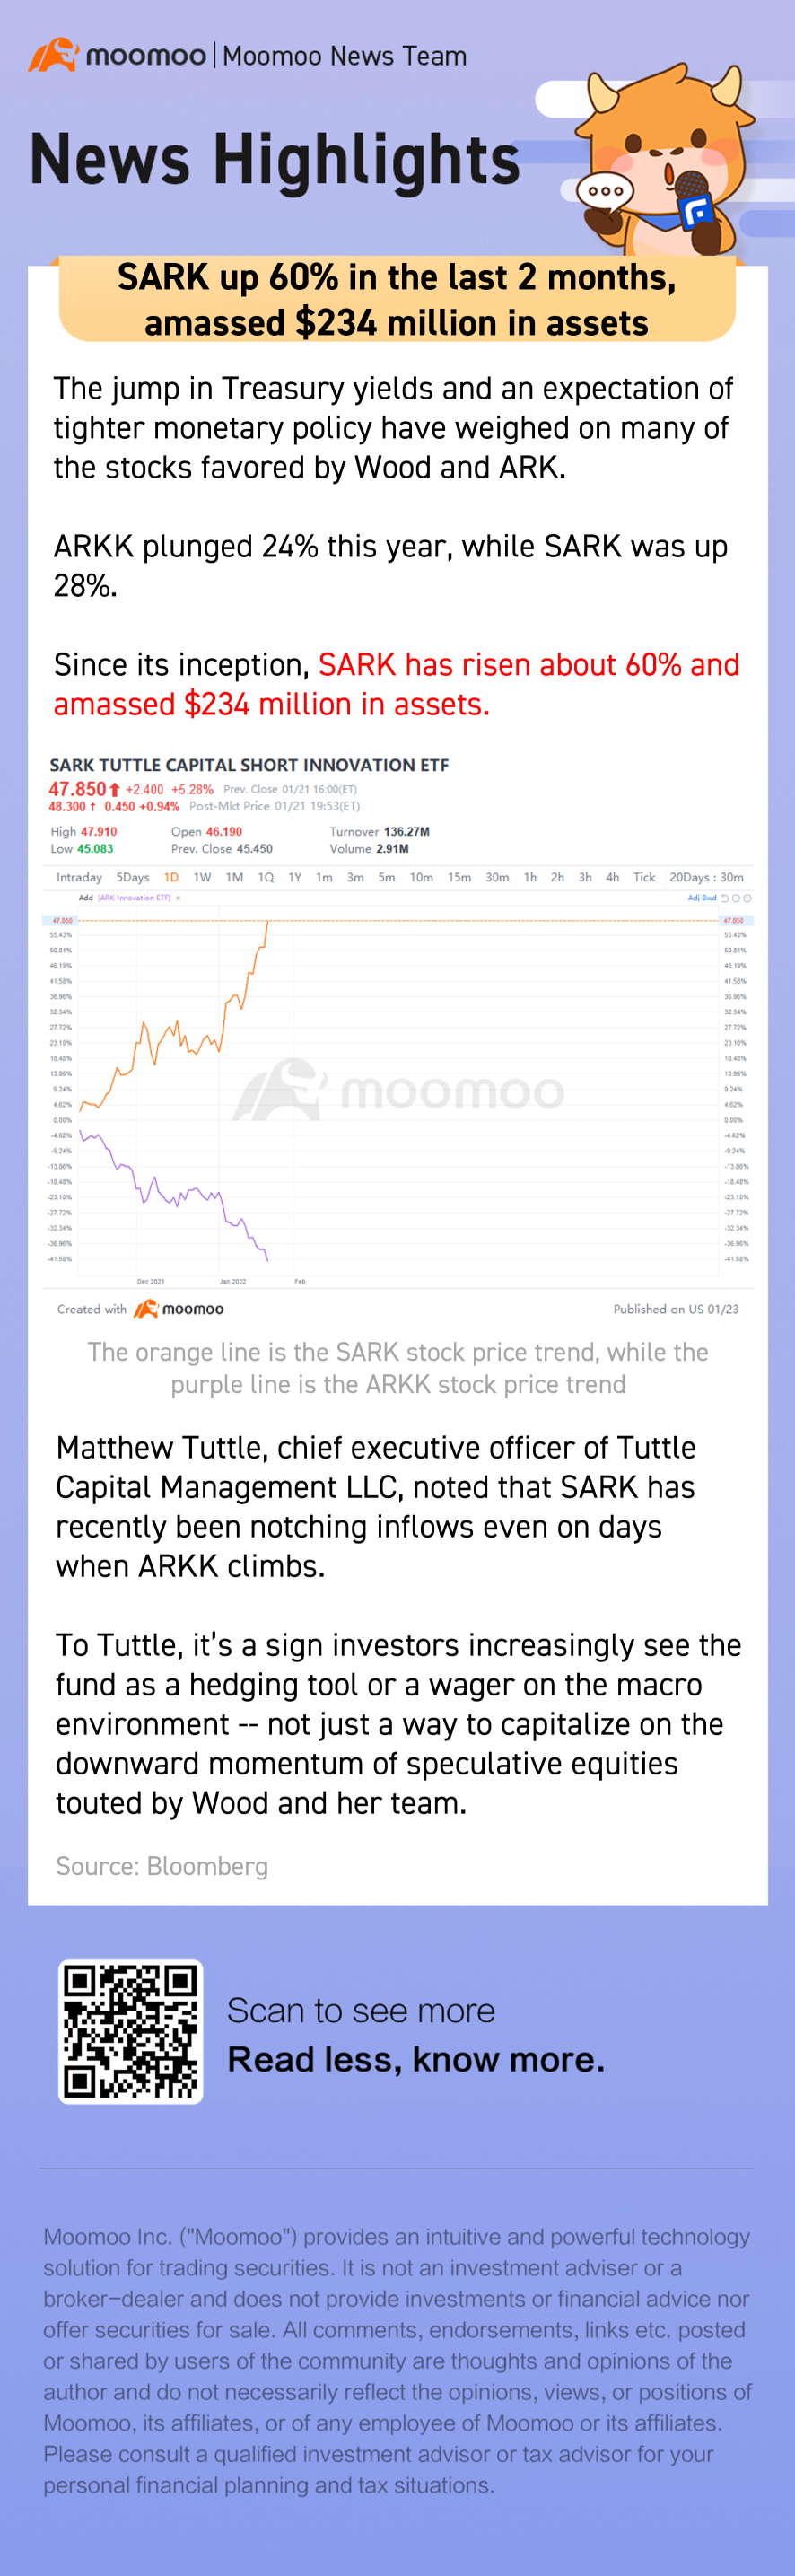 SARK up 60% in the last 2 months, amassed $234 million in assets